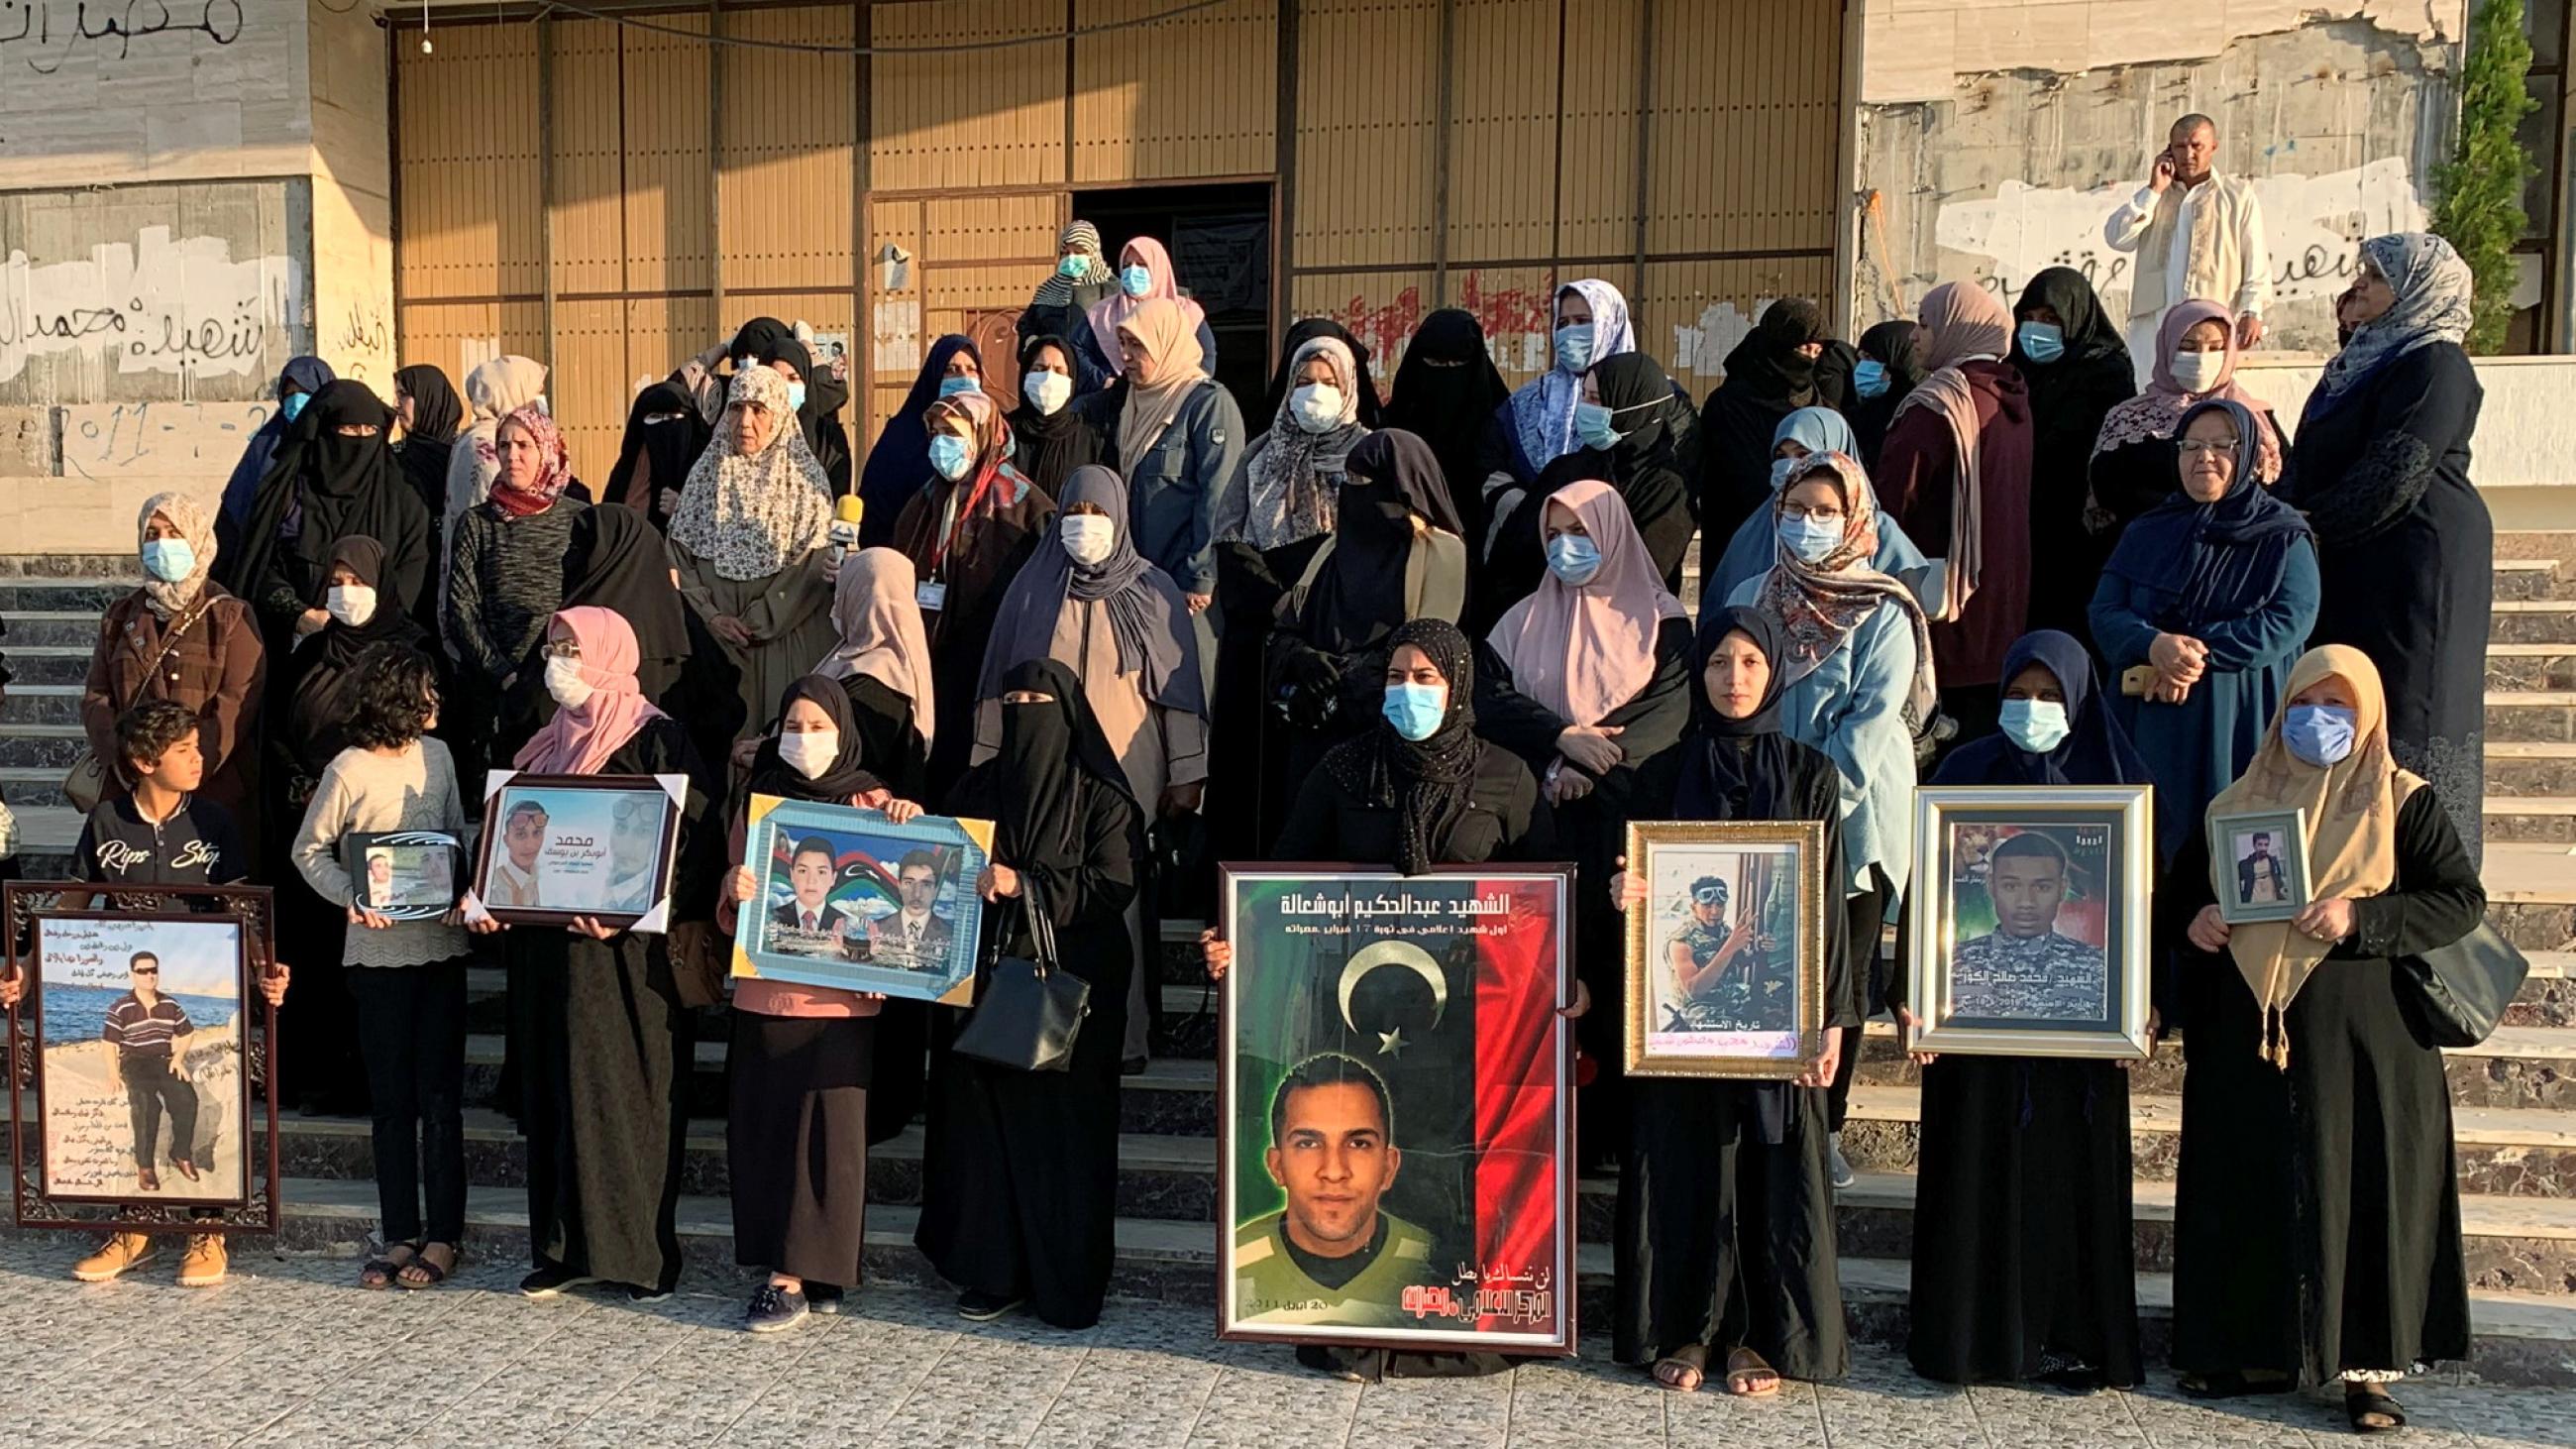 Women protest a lack of government support after losing their husbands and children to the Second Libyan War Civil War, in Misrata, Libya, on November 7, 2020.